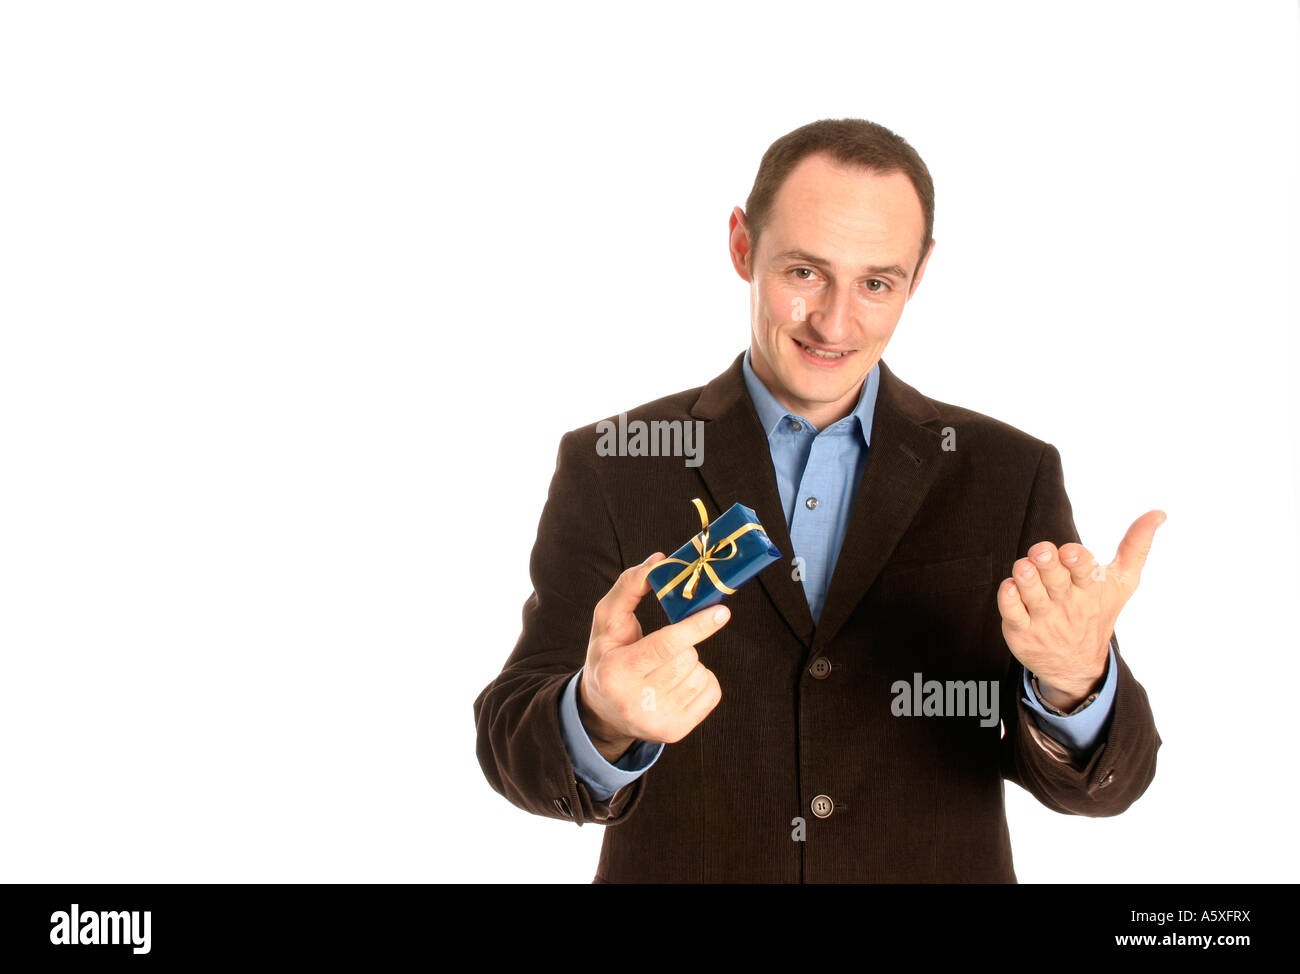 Man standing with gift box smiling close up portrait Stock Photo